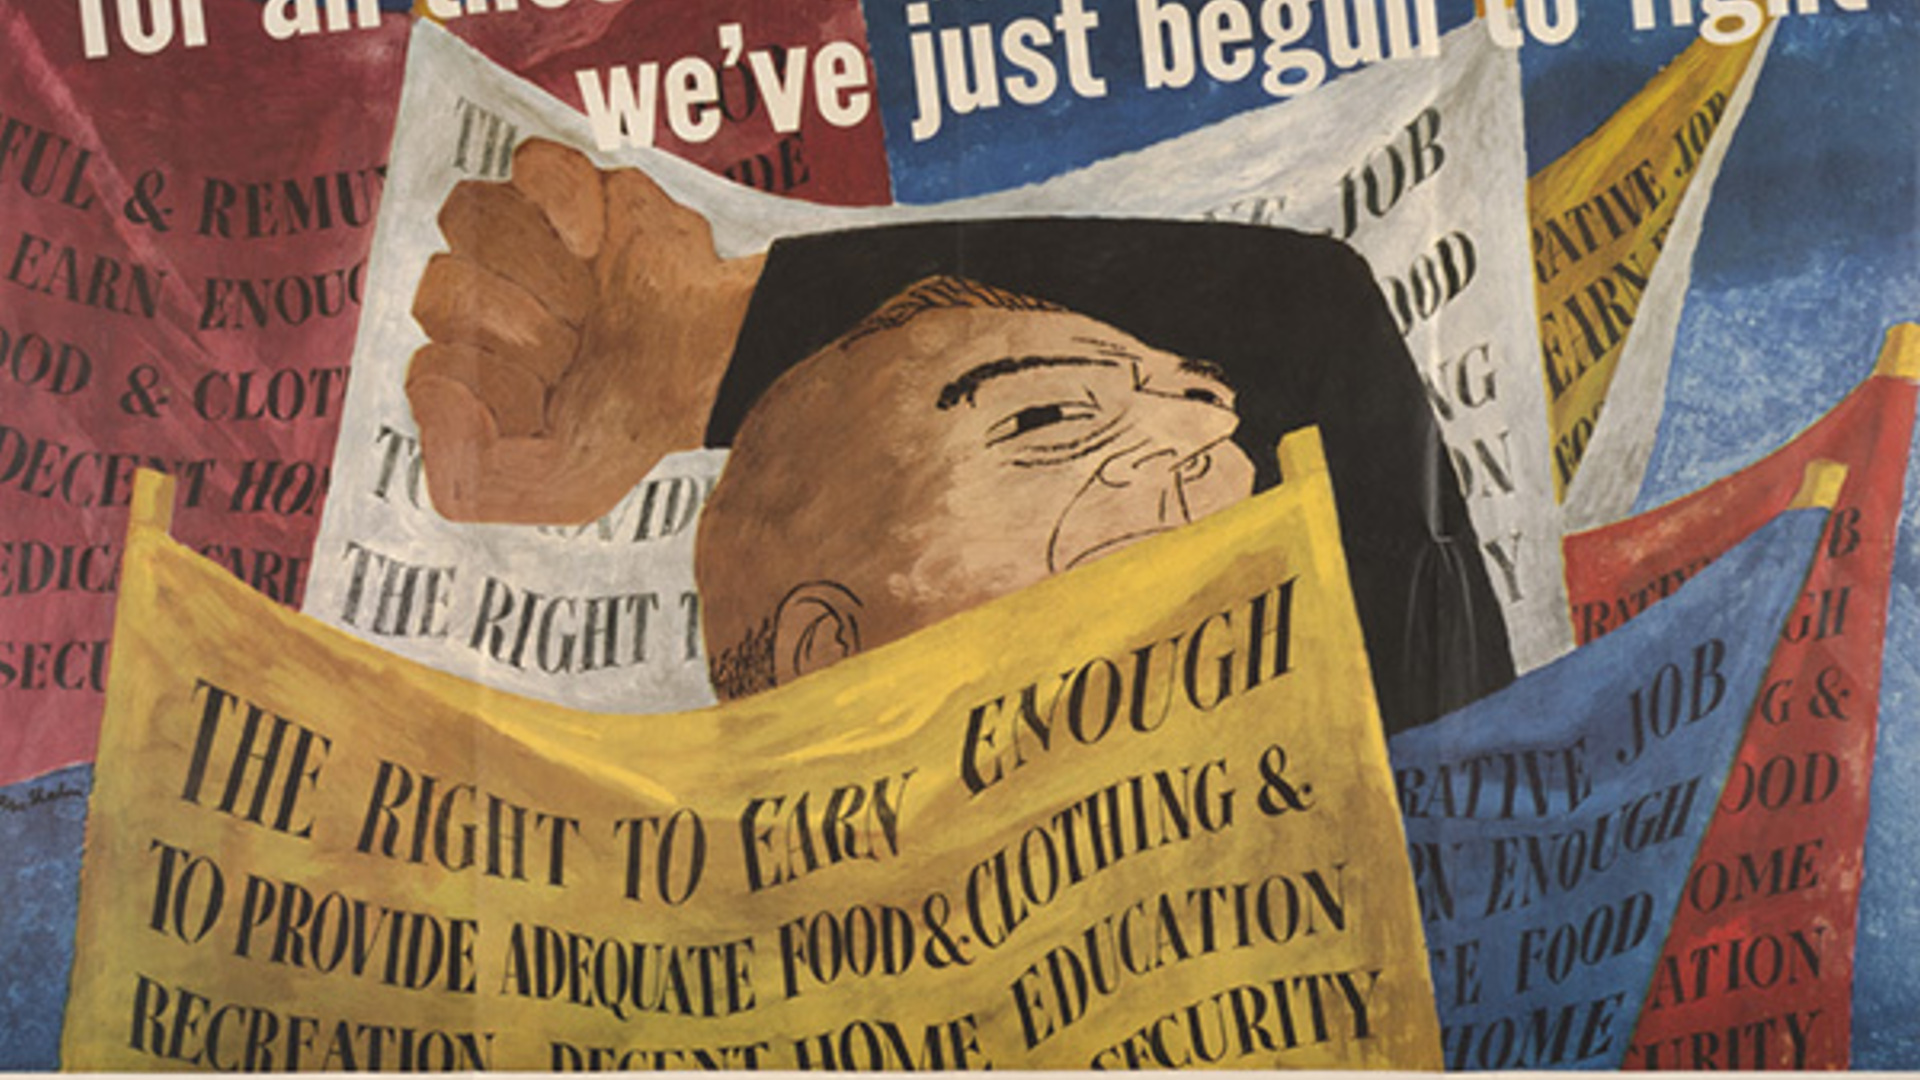 Ben Shahn, American, 1898–1969, <em>For All These Rights We've Just Begun to Fight</em>, 1946, color offset lithograph, 29 x 38.5 inches. Gift of Beatrice Riese, 1991.079.002.c